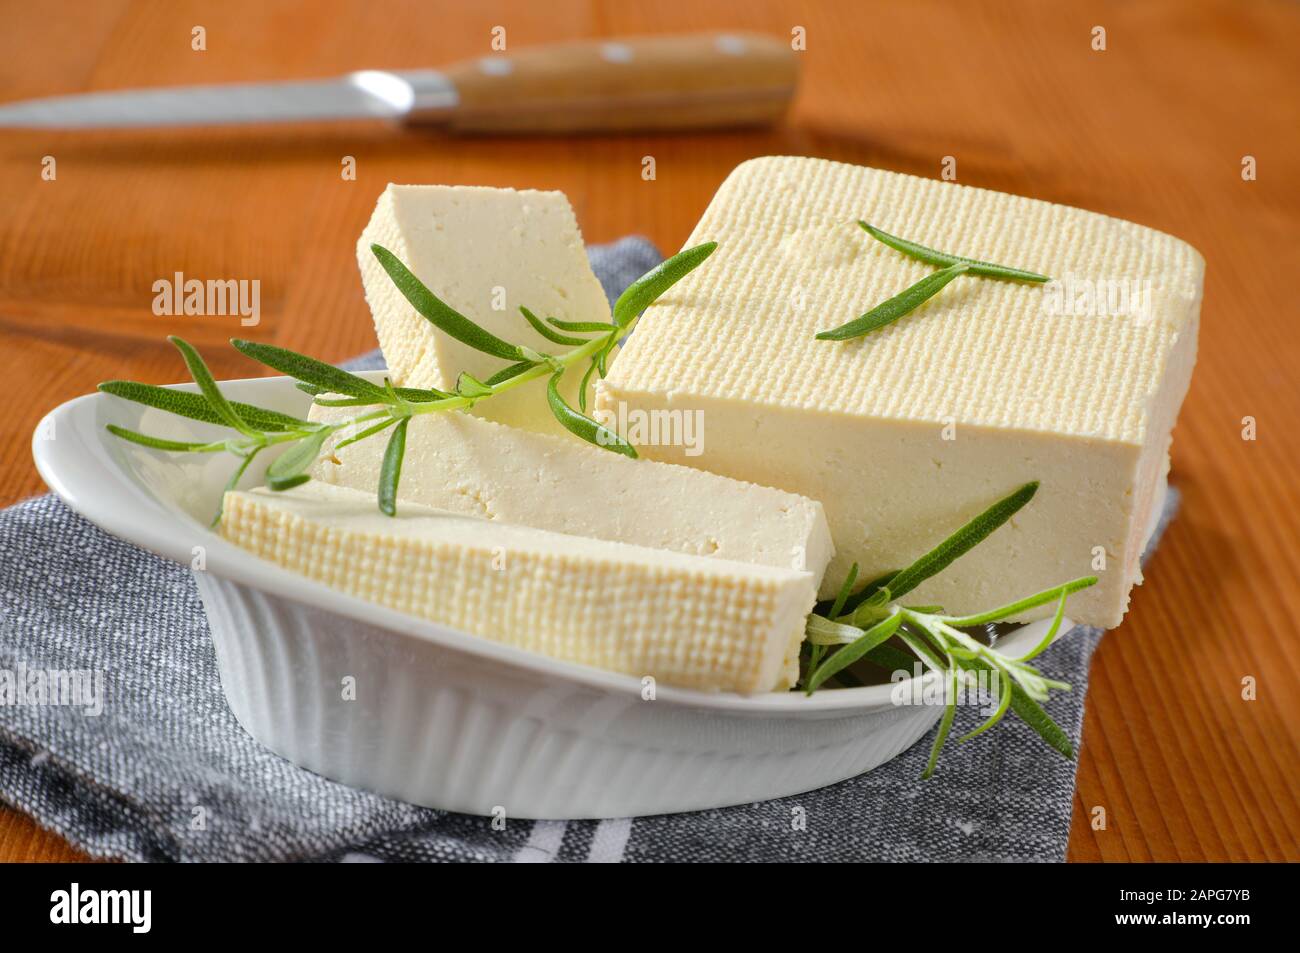 Half a block and slices of firm bean curd (tofu) in white bowl Stock Photo